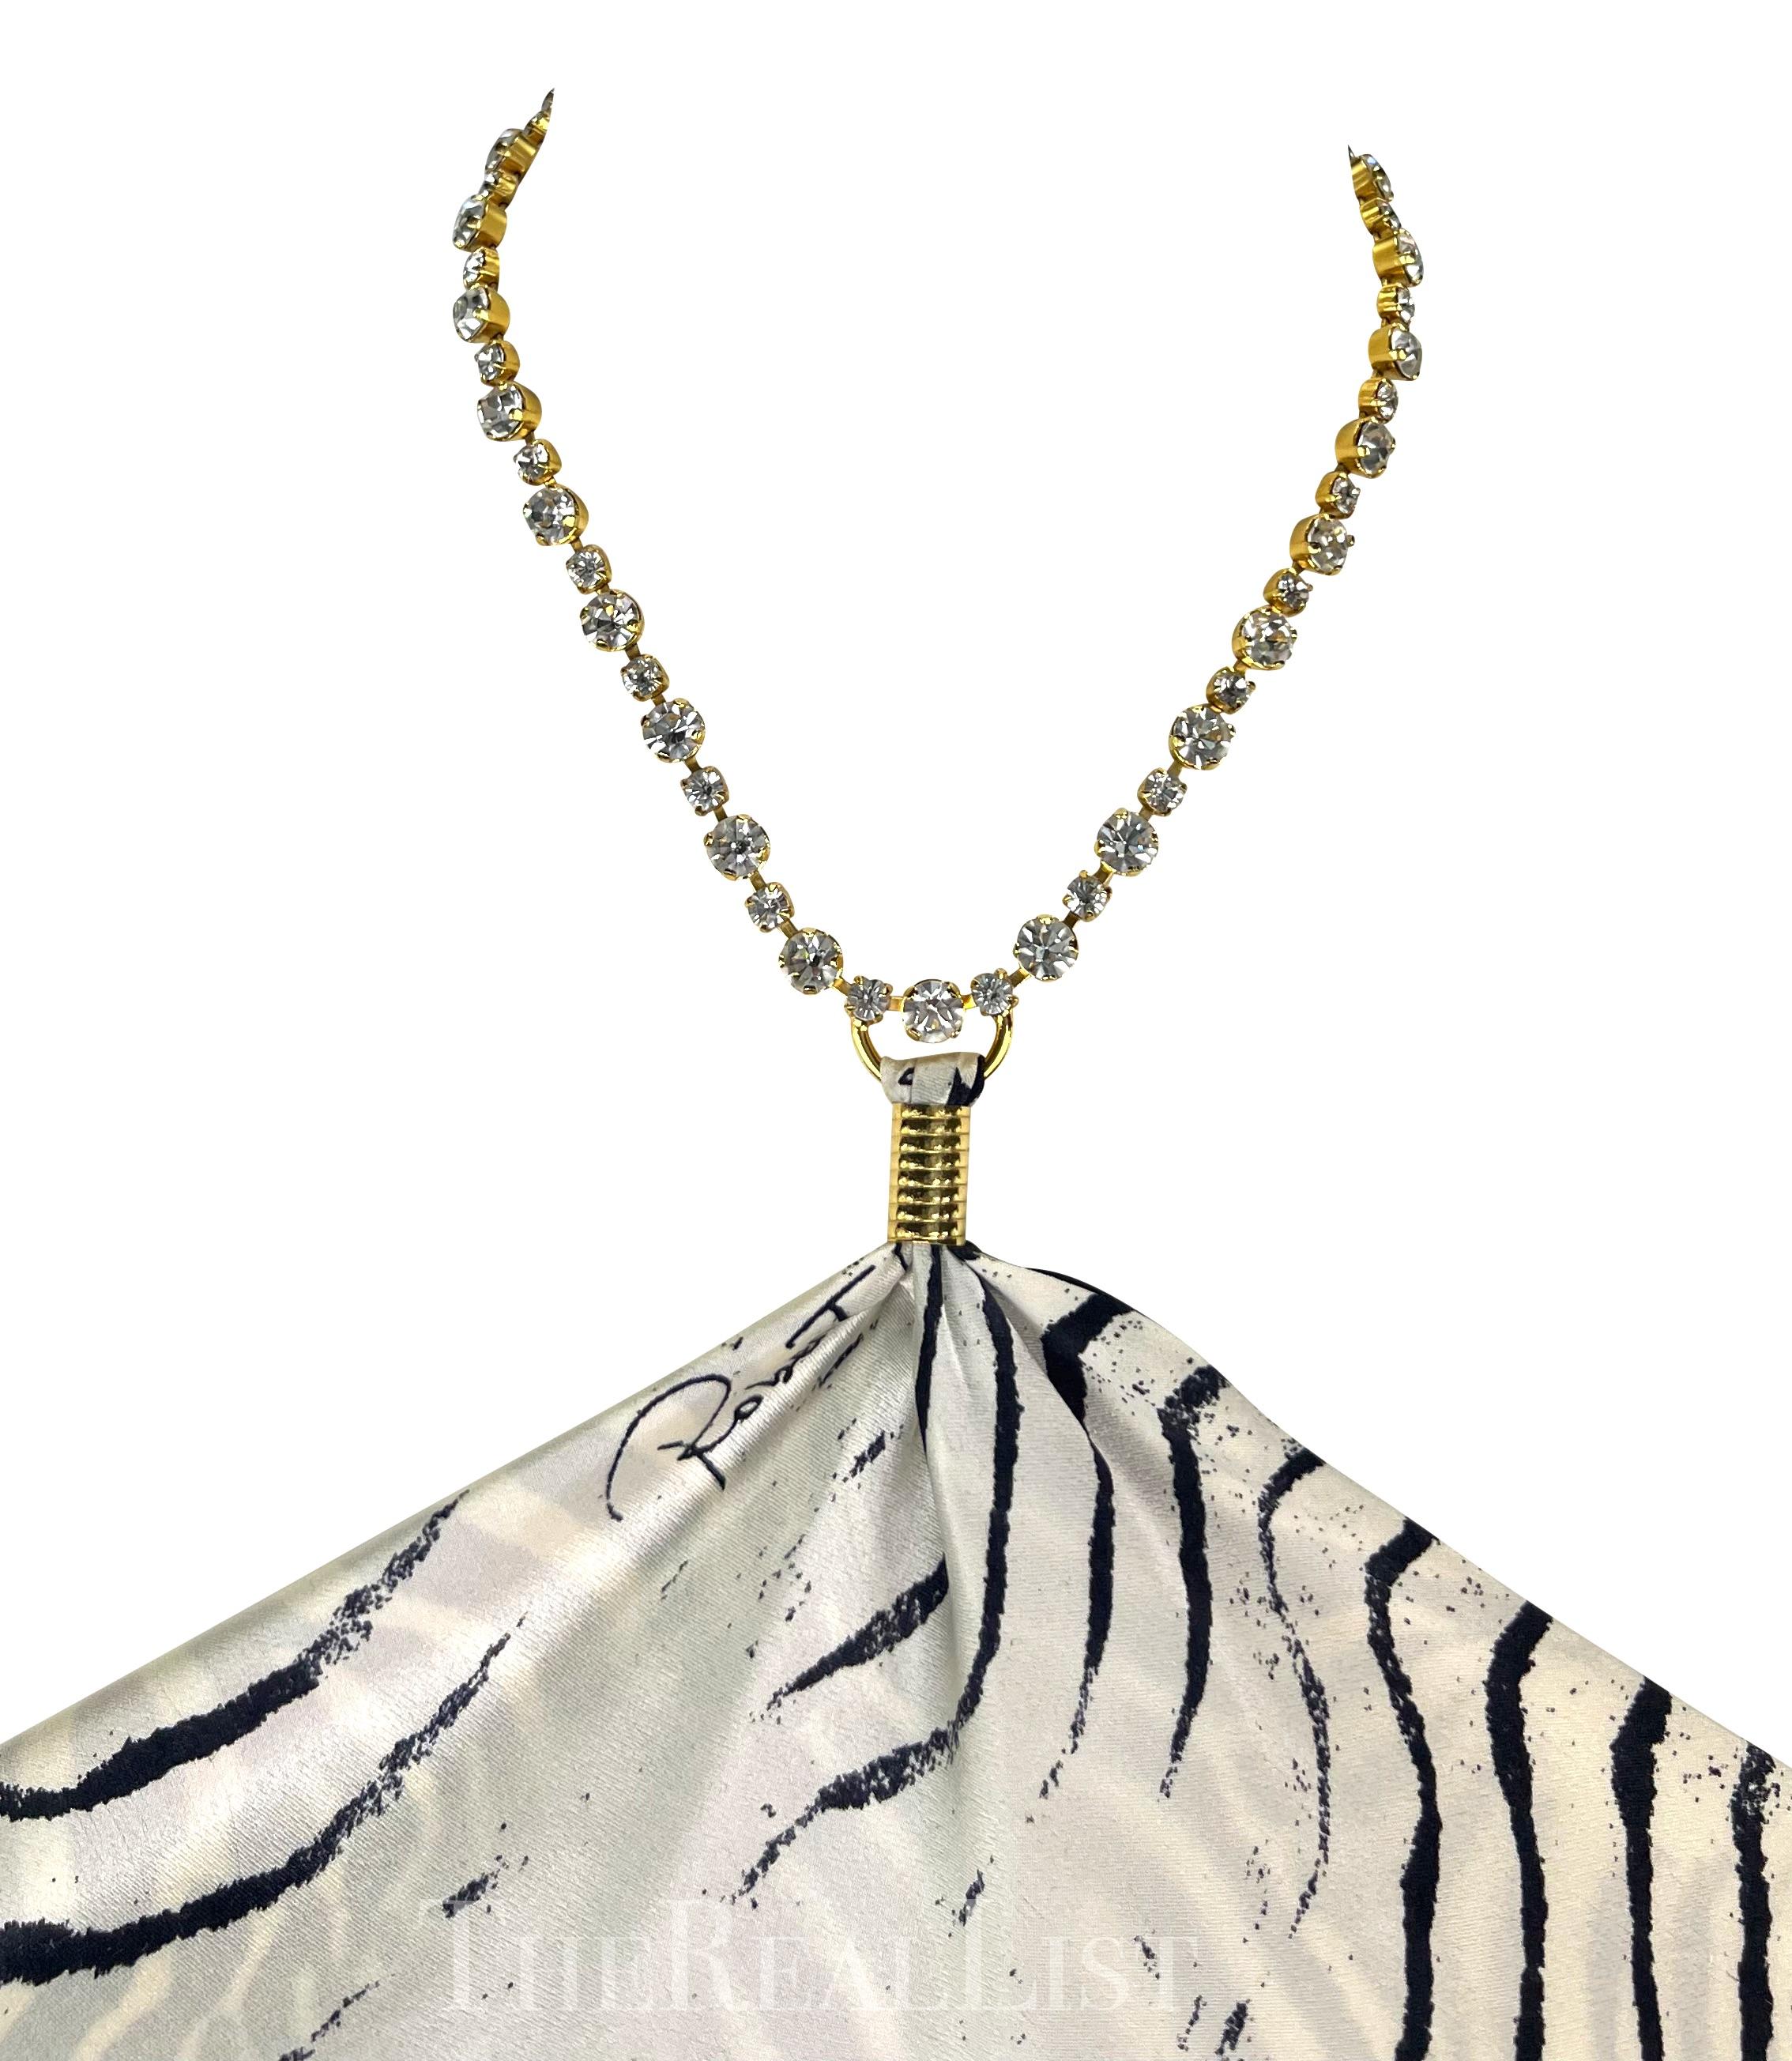 Presenting a fabulous zebra print Roberto Cavalli silk scarf top. From the Spring/Summer 2000 collection, this piece can be tied multiple ways and is made complete with a gold rhinestone chain halter neck. Perfect for a day at the beach or a night